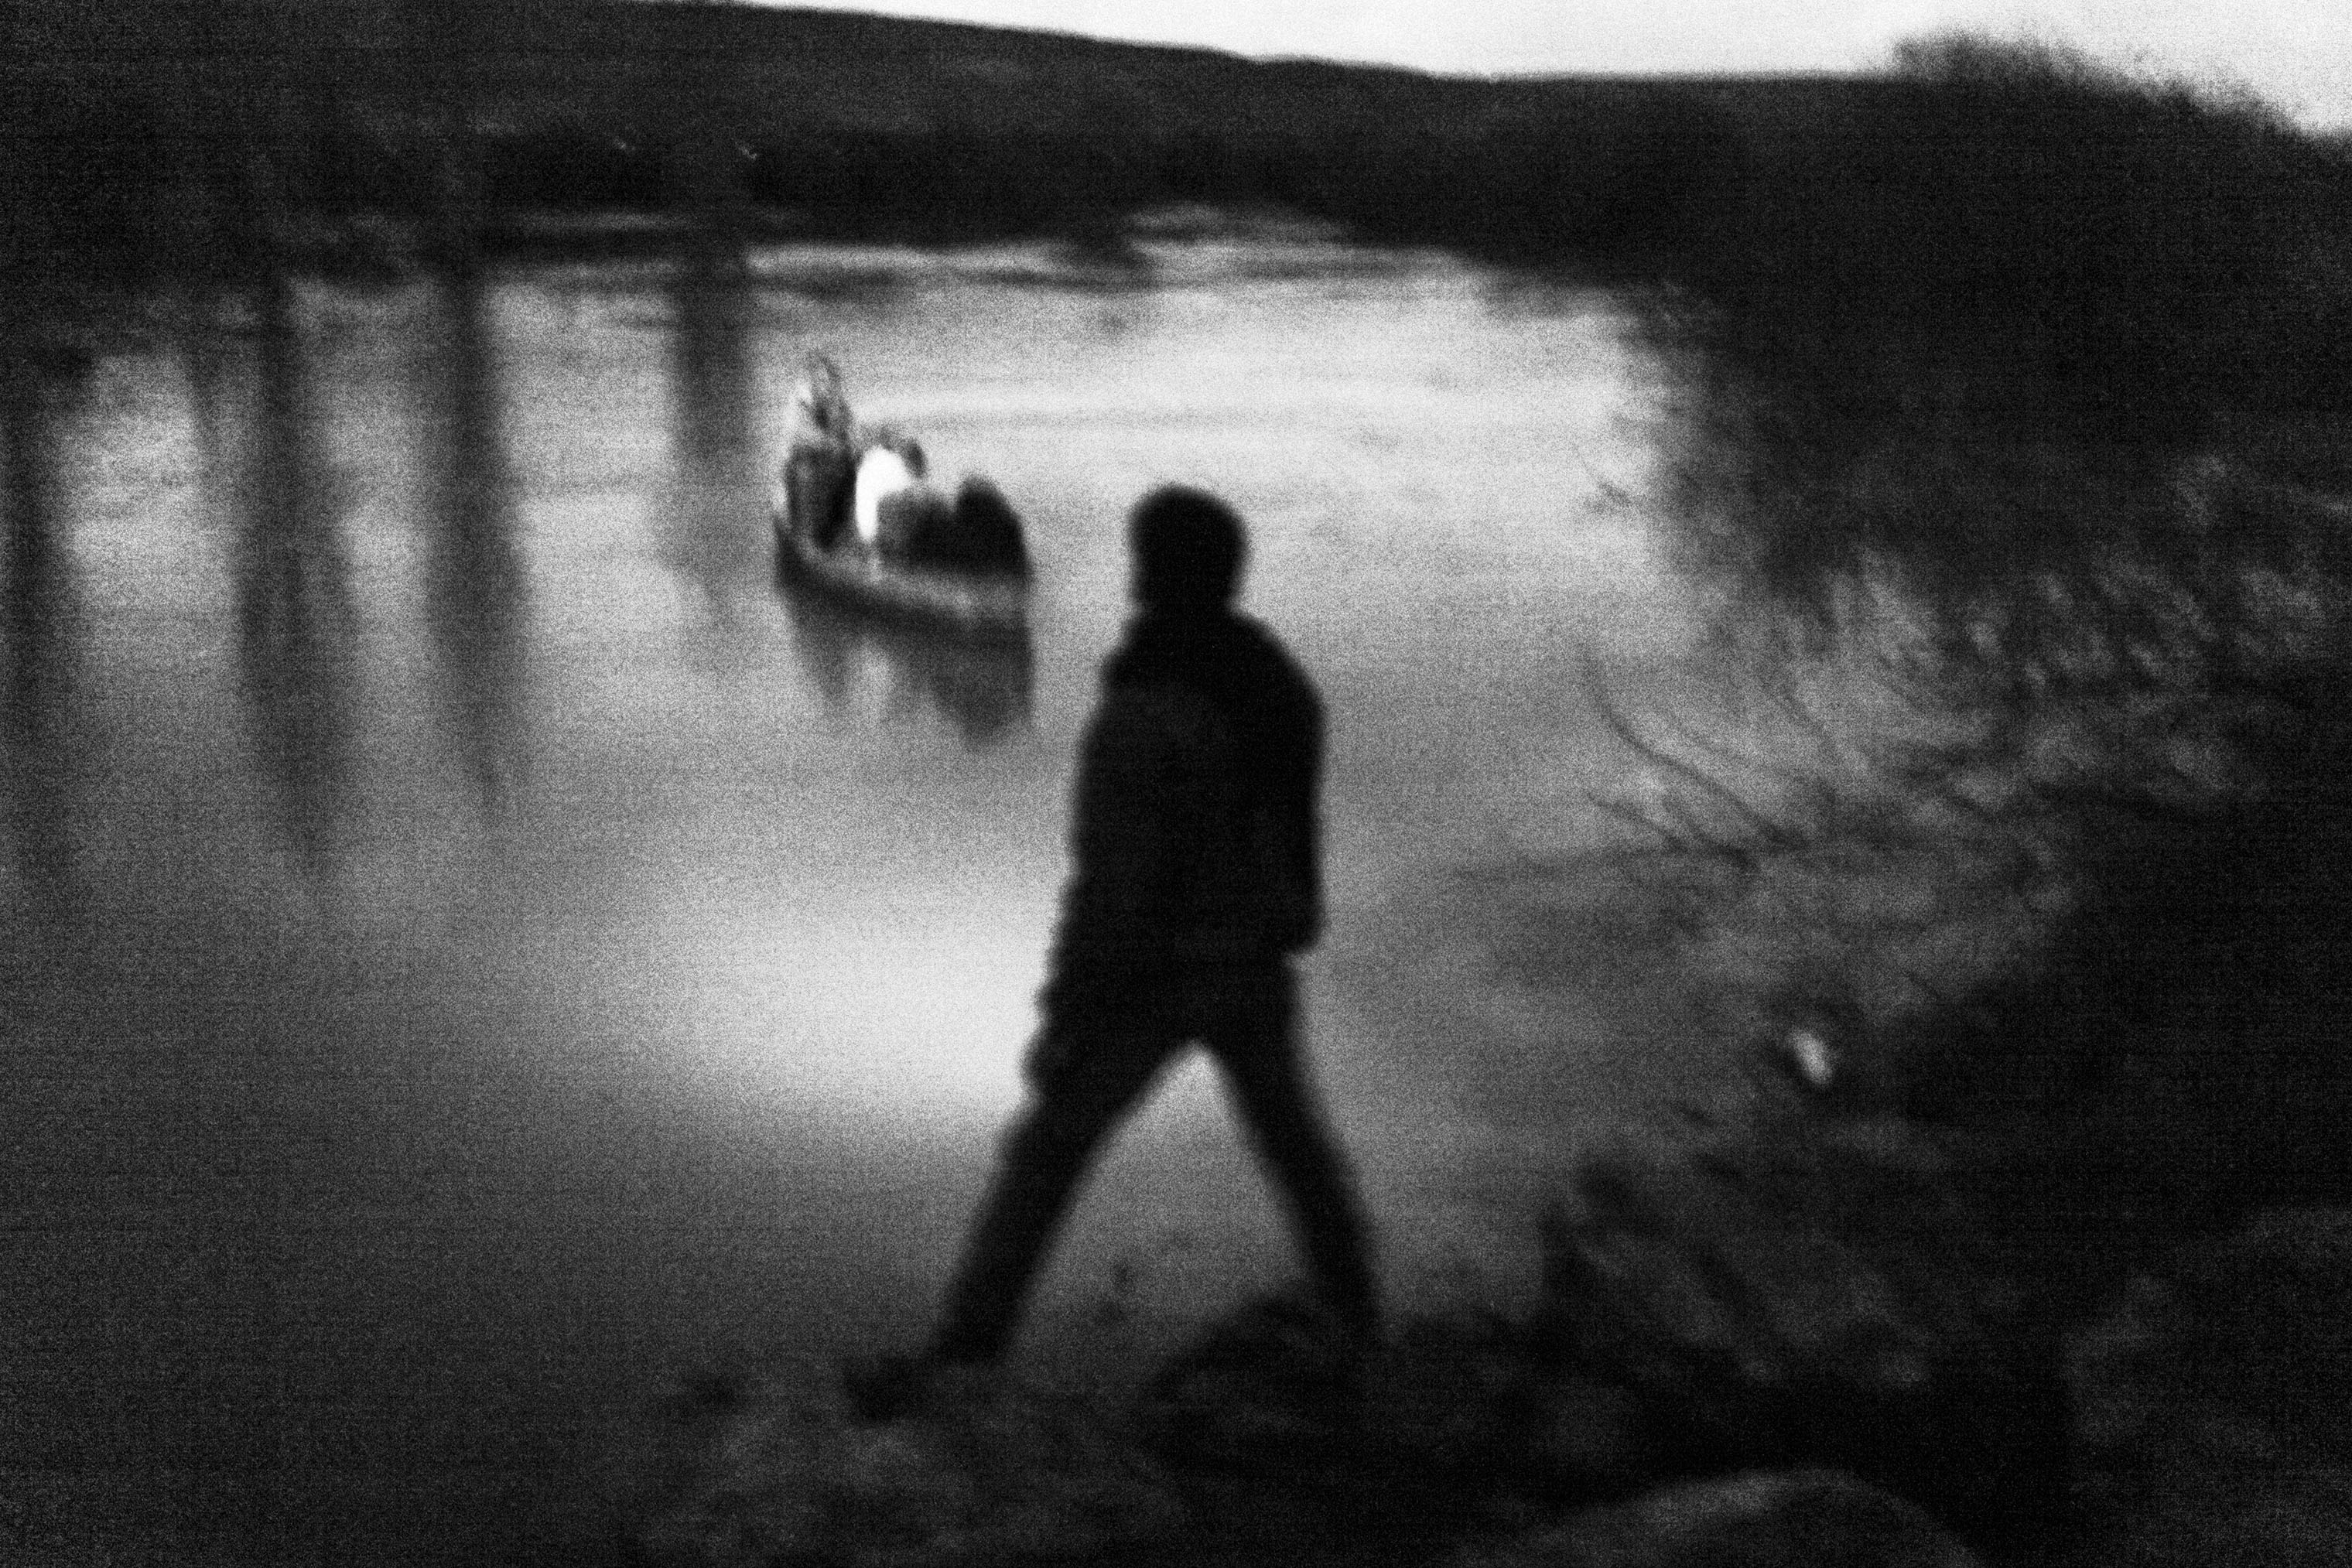 Along the Turkish-Syrian border under the cover of night, a network of Syrian smugglers transport a family fleeing the violence inside Syria on a rowboat across the Orontes River, which marks a stretch of the border between northern Syria and southern Turkey. (Moises Saman—Magnum Photos)